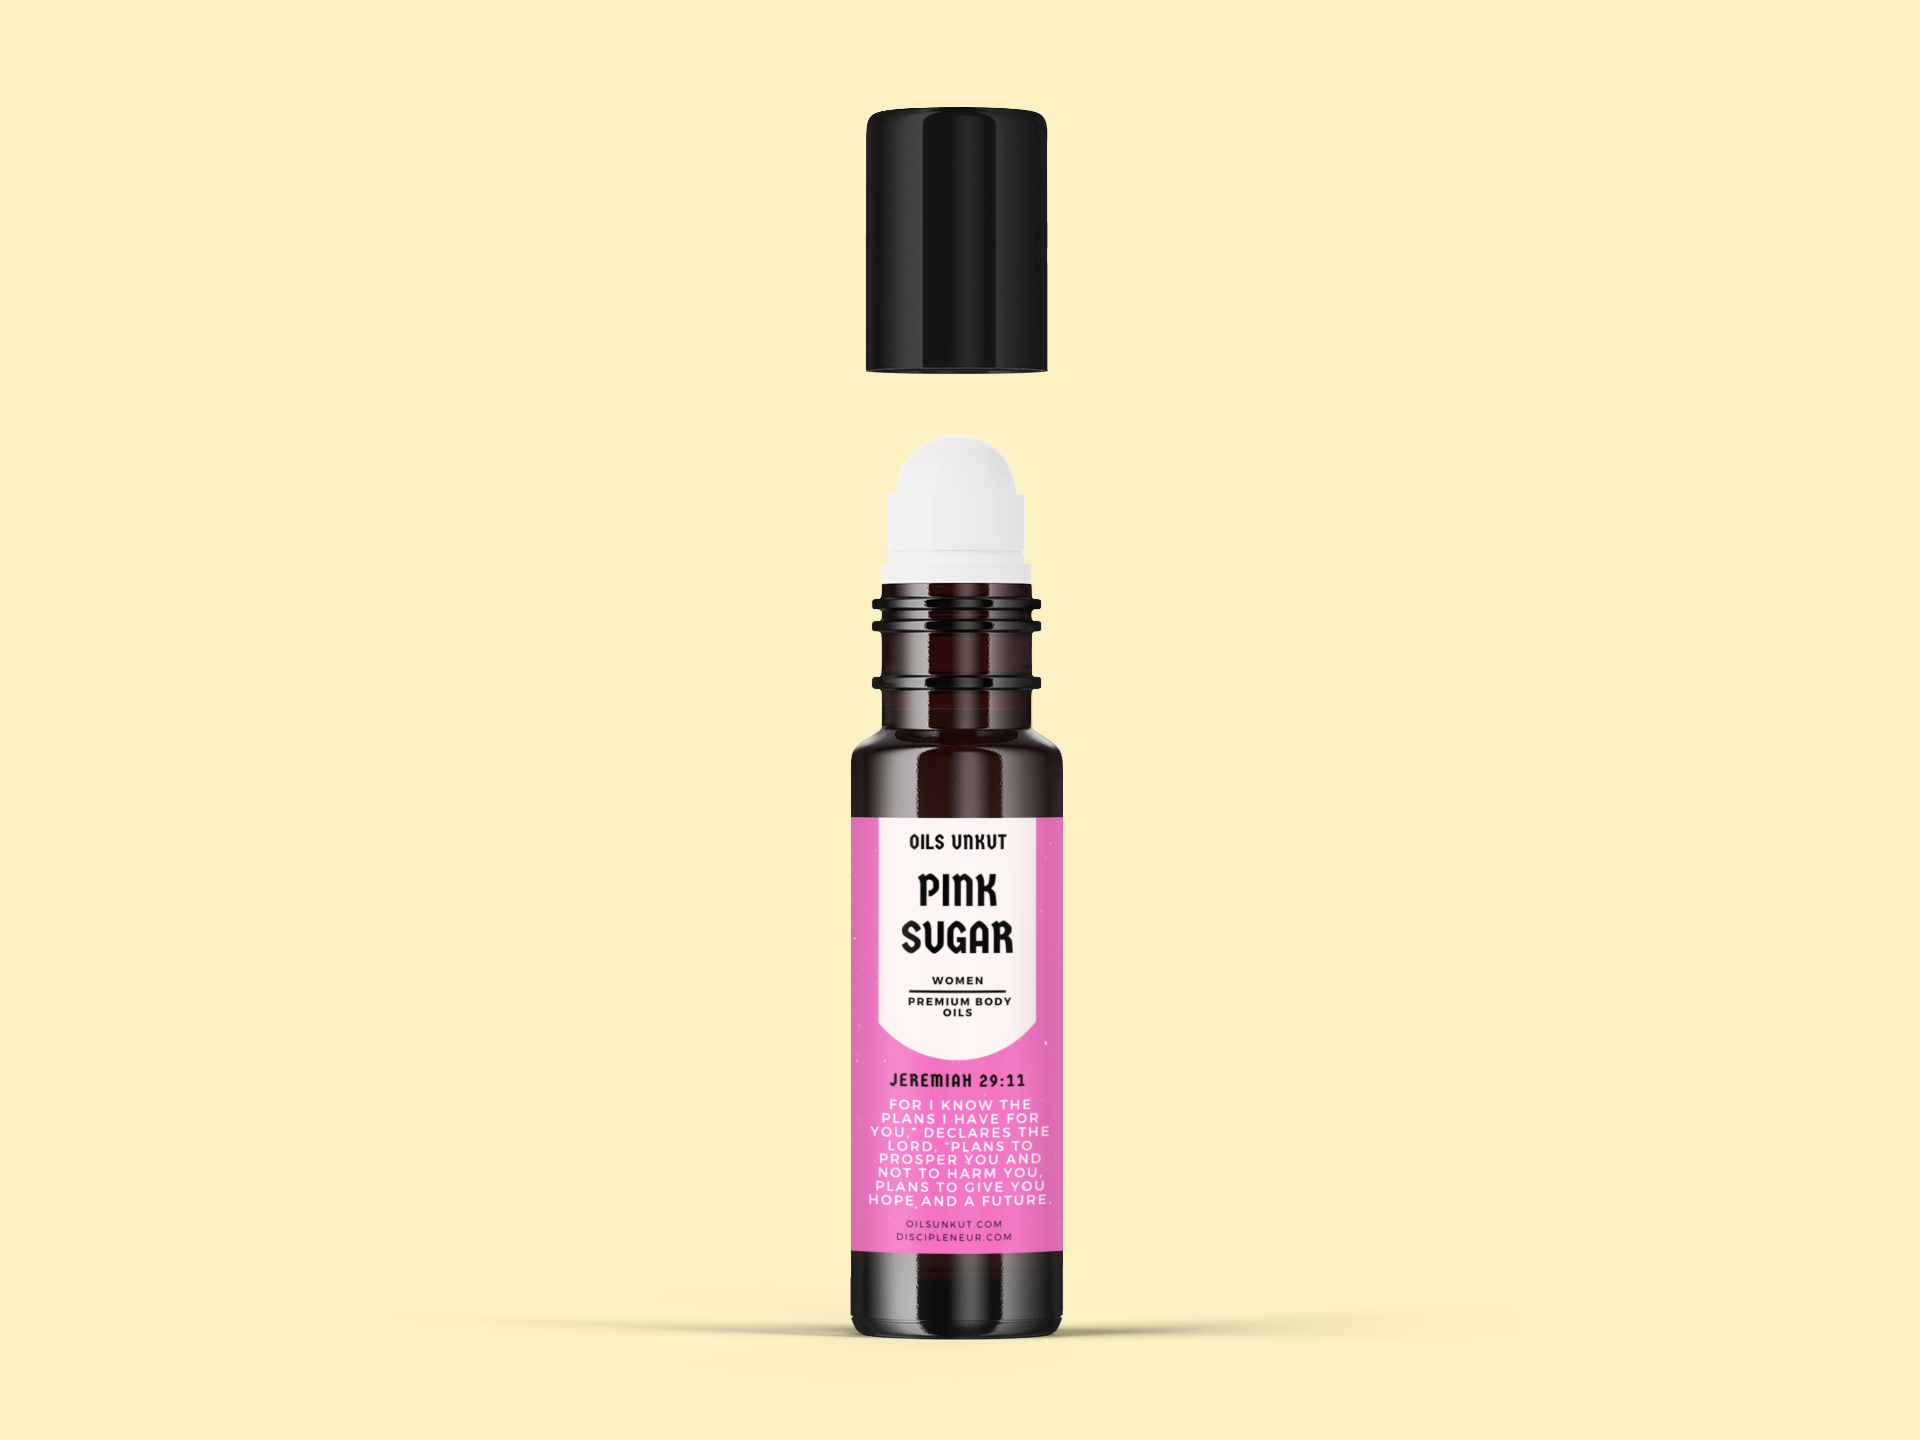 Pink Sugar Body Oil | Scented Fragrance & Perfume Oils